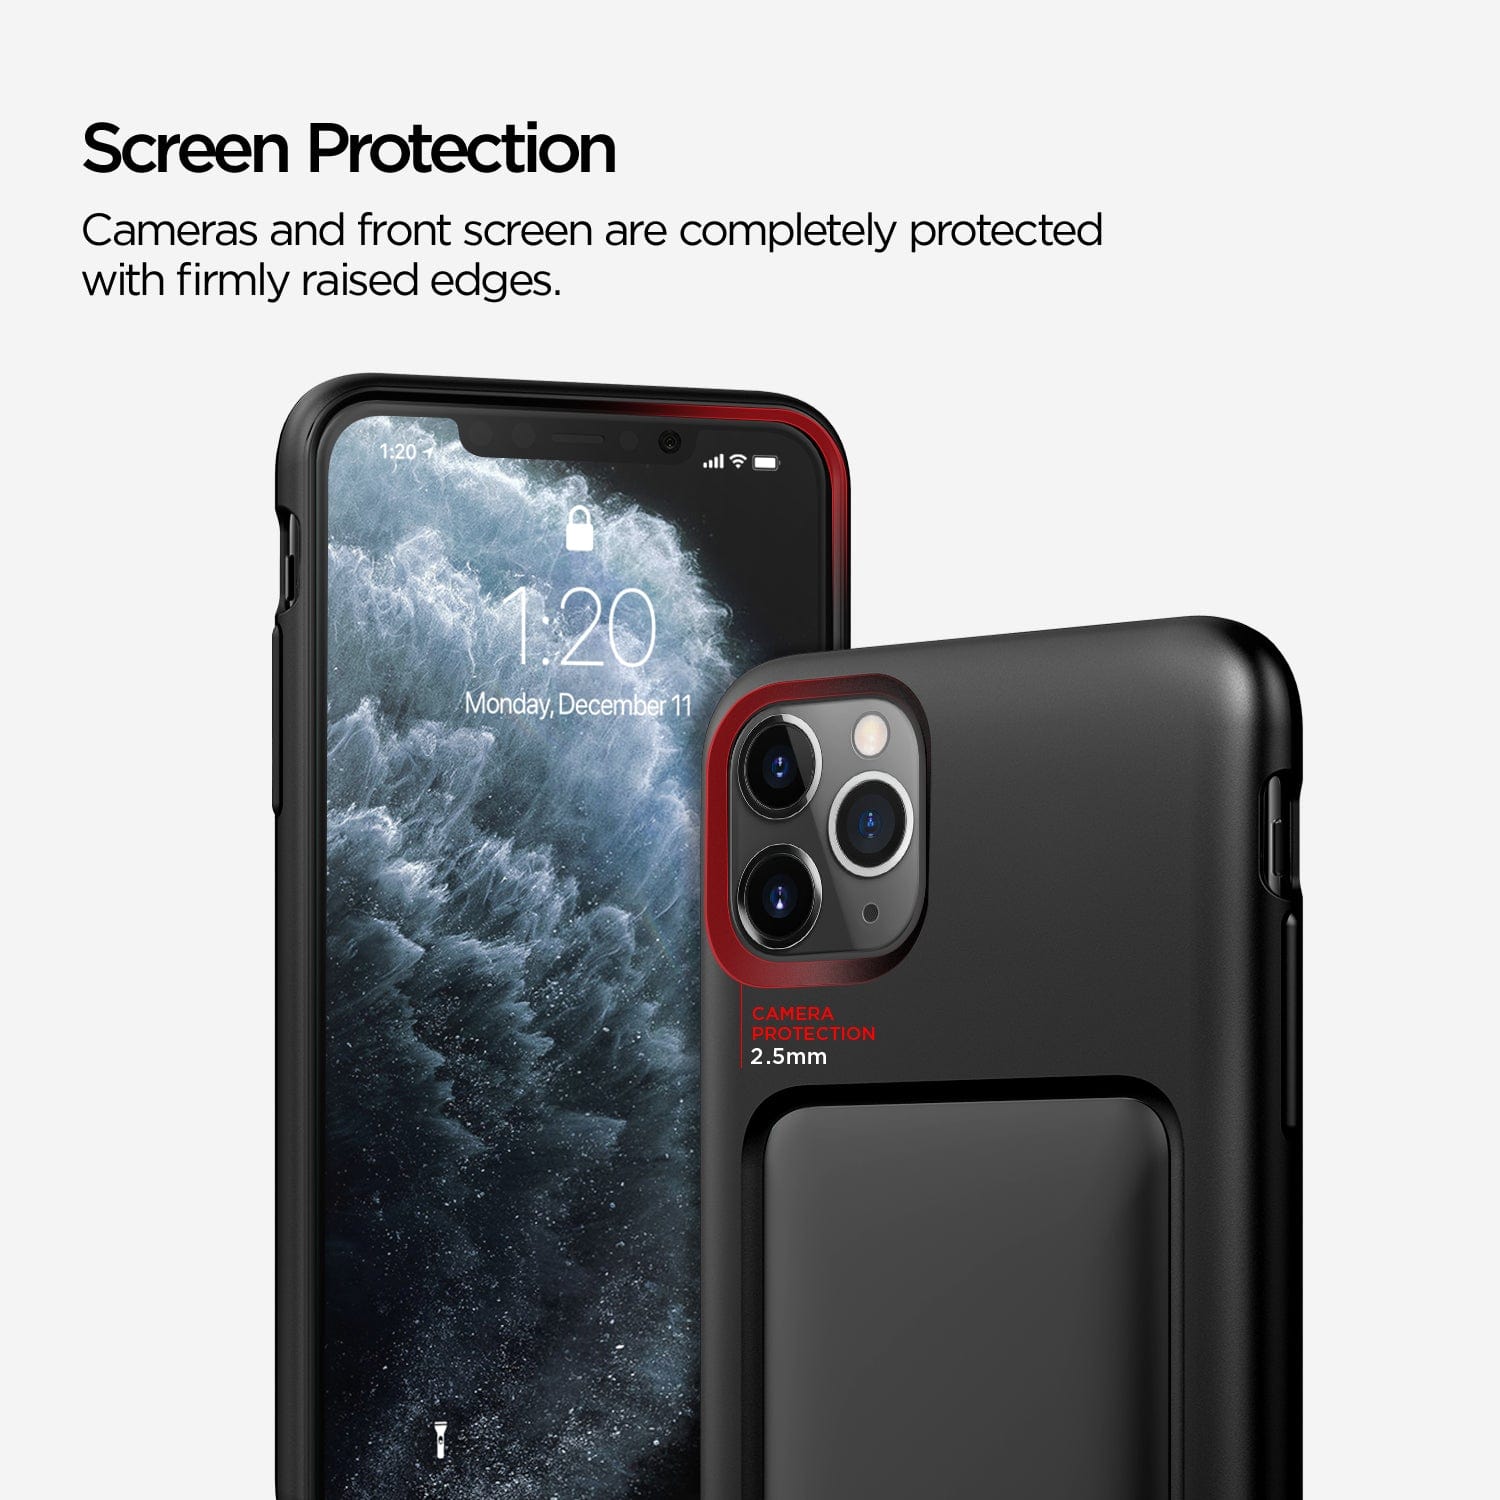 Firmly raised edges protective case for iPhone 11 Pro max 